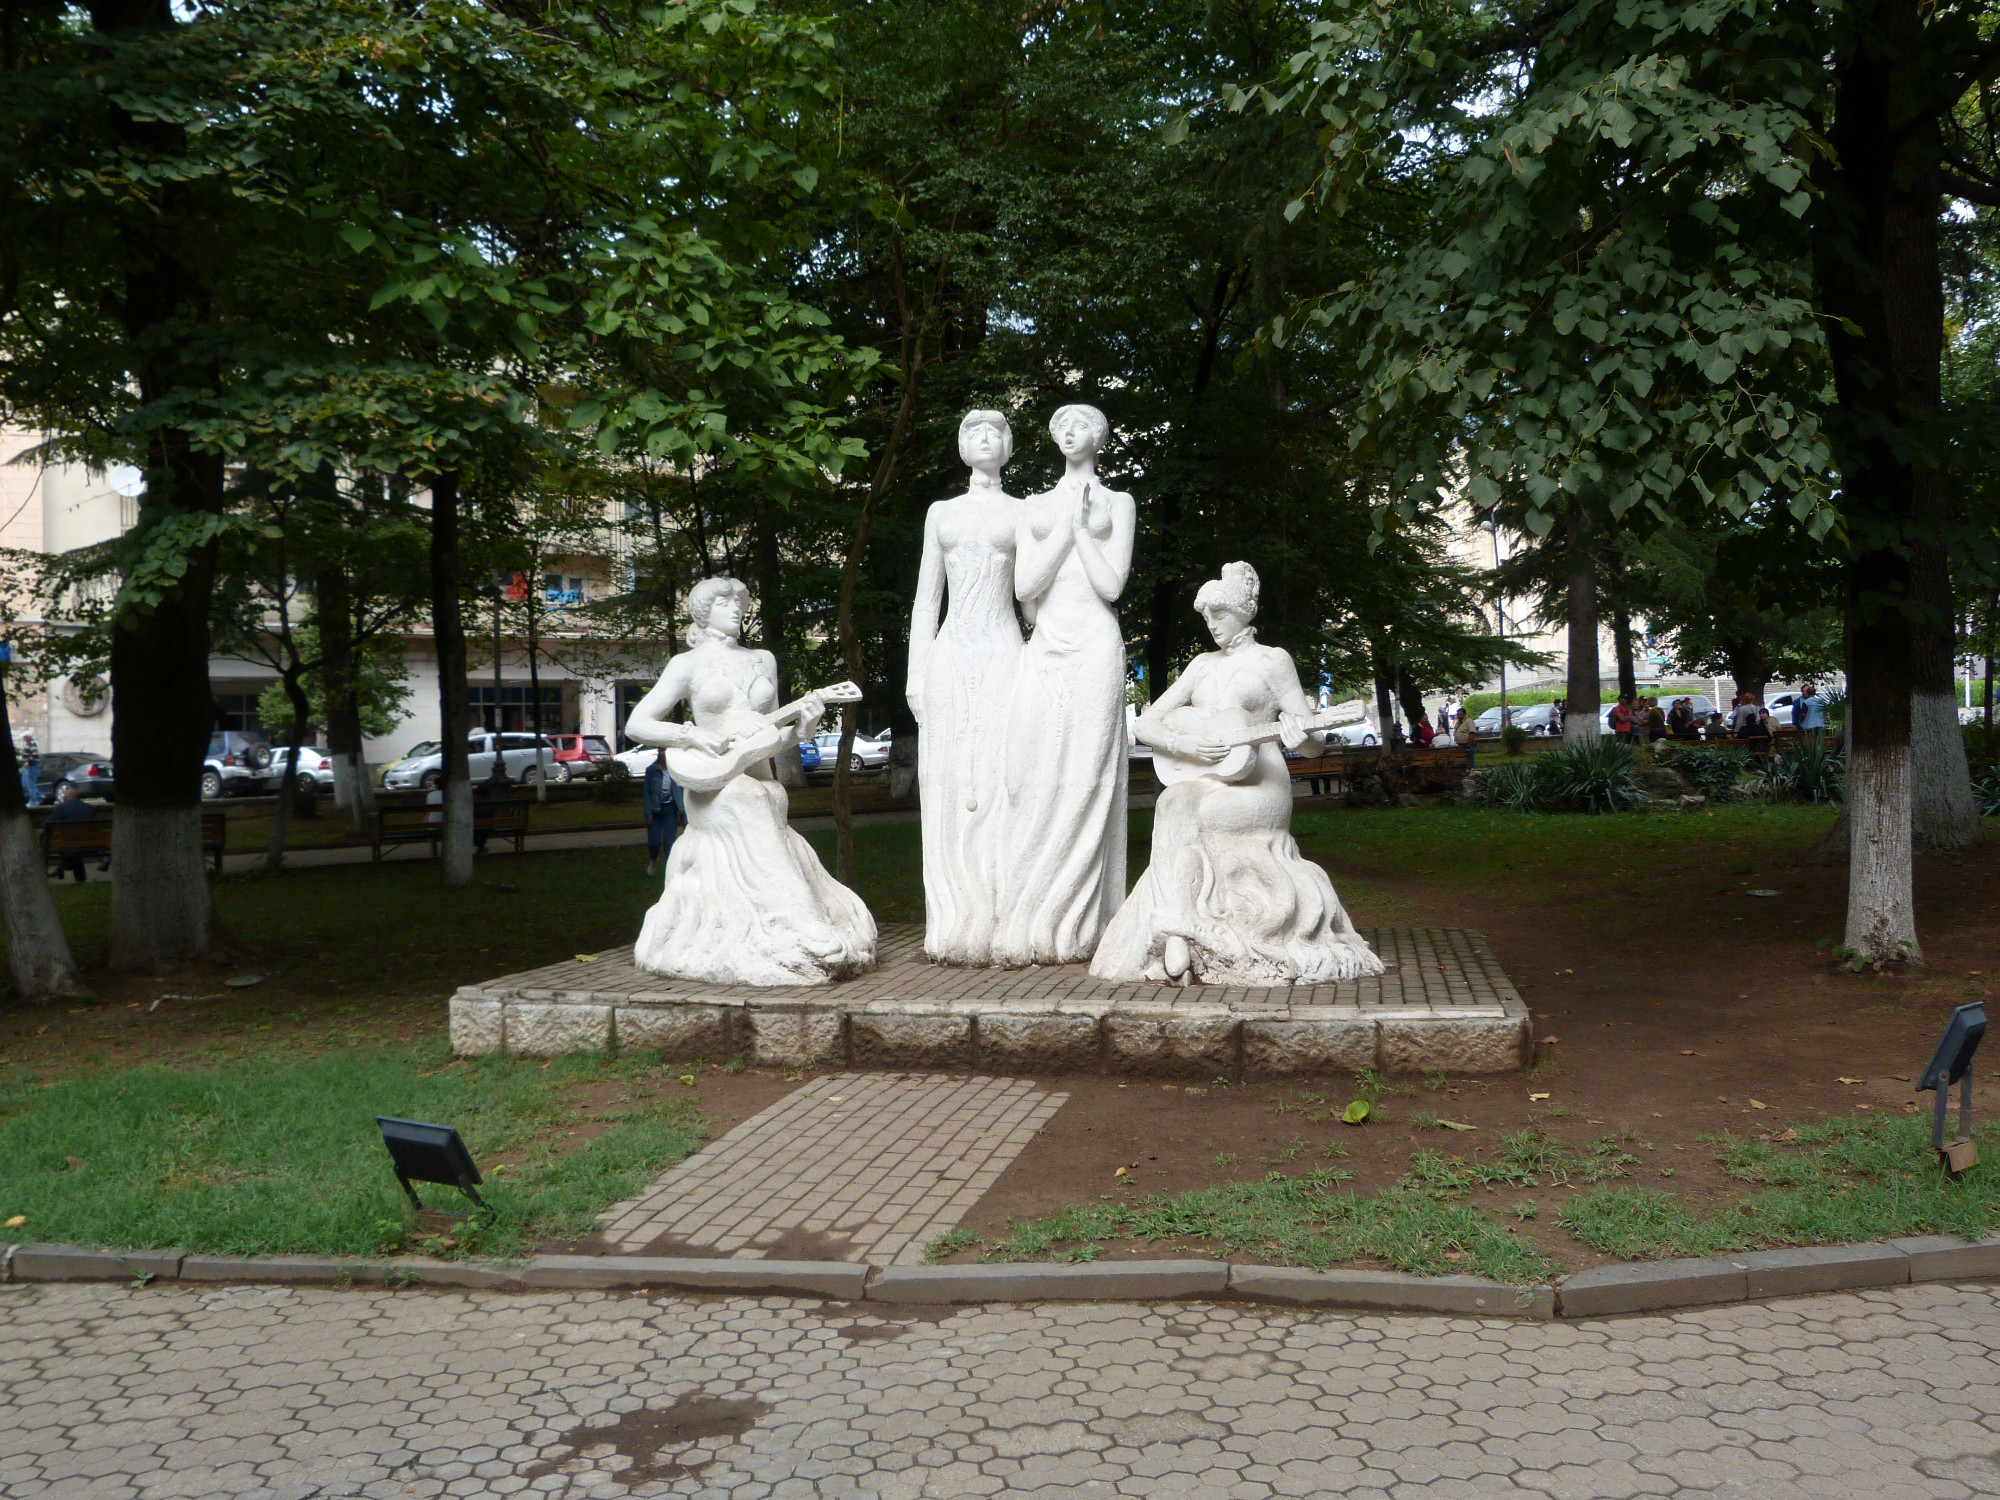 Statues of Ishkhneli sisters central park